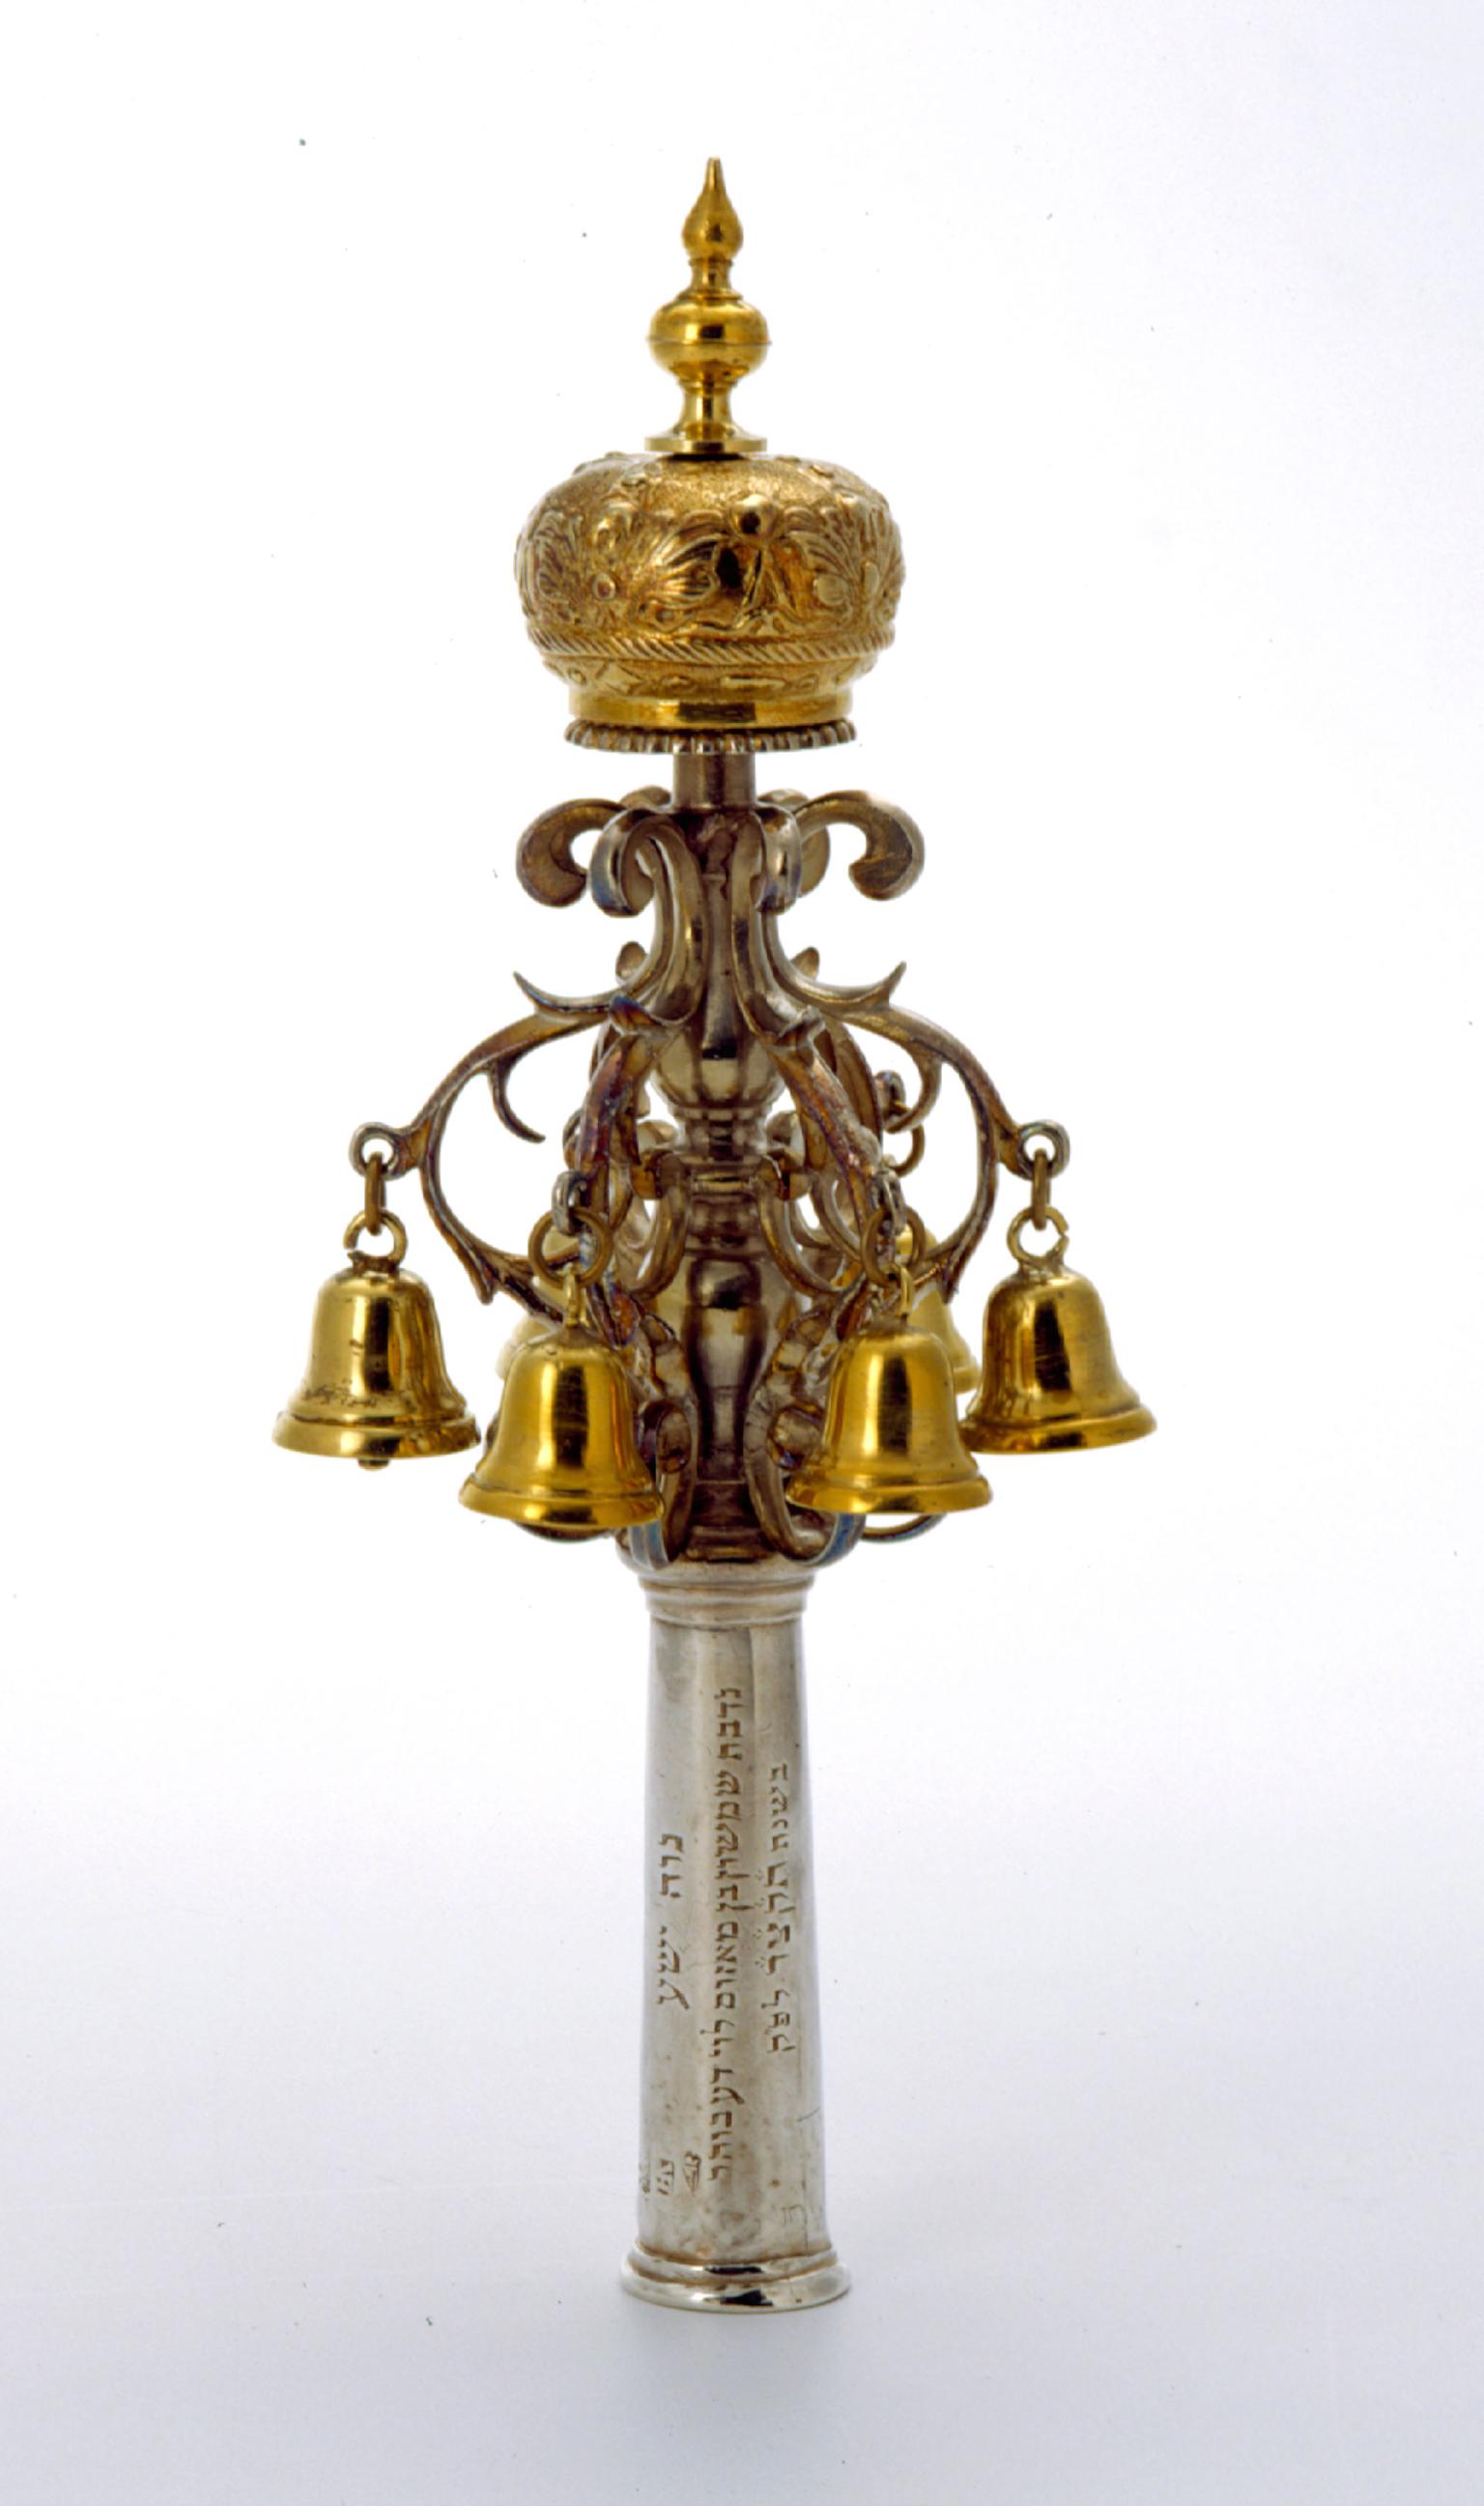 Finial with Hebrew inscription on its base, bells, and crown on top.